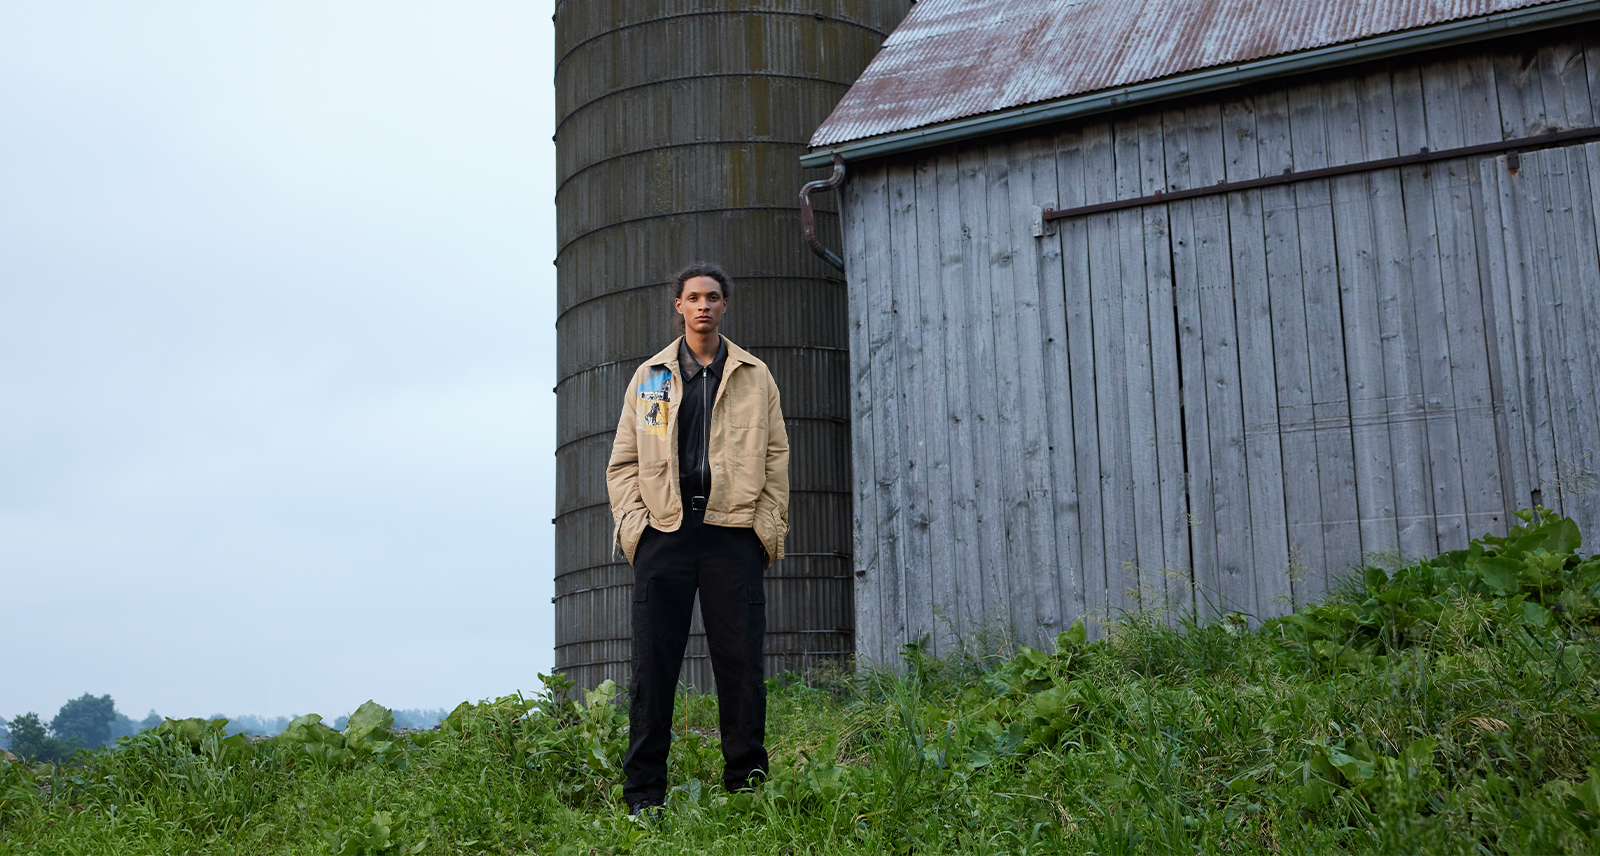 Man stands in front of a silo on a grey day